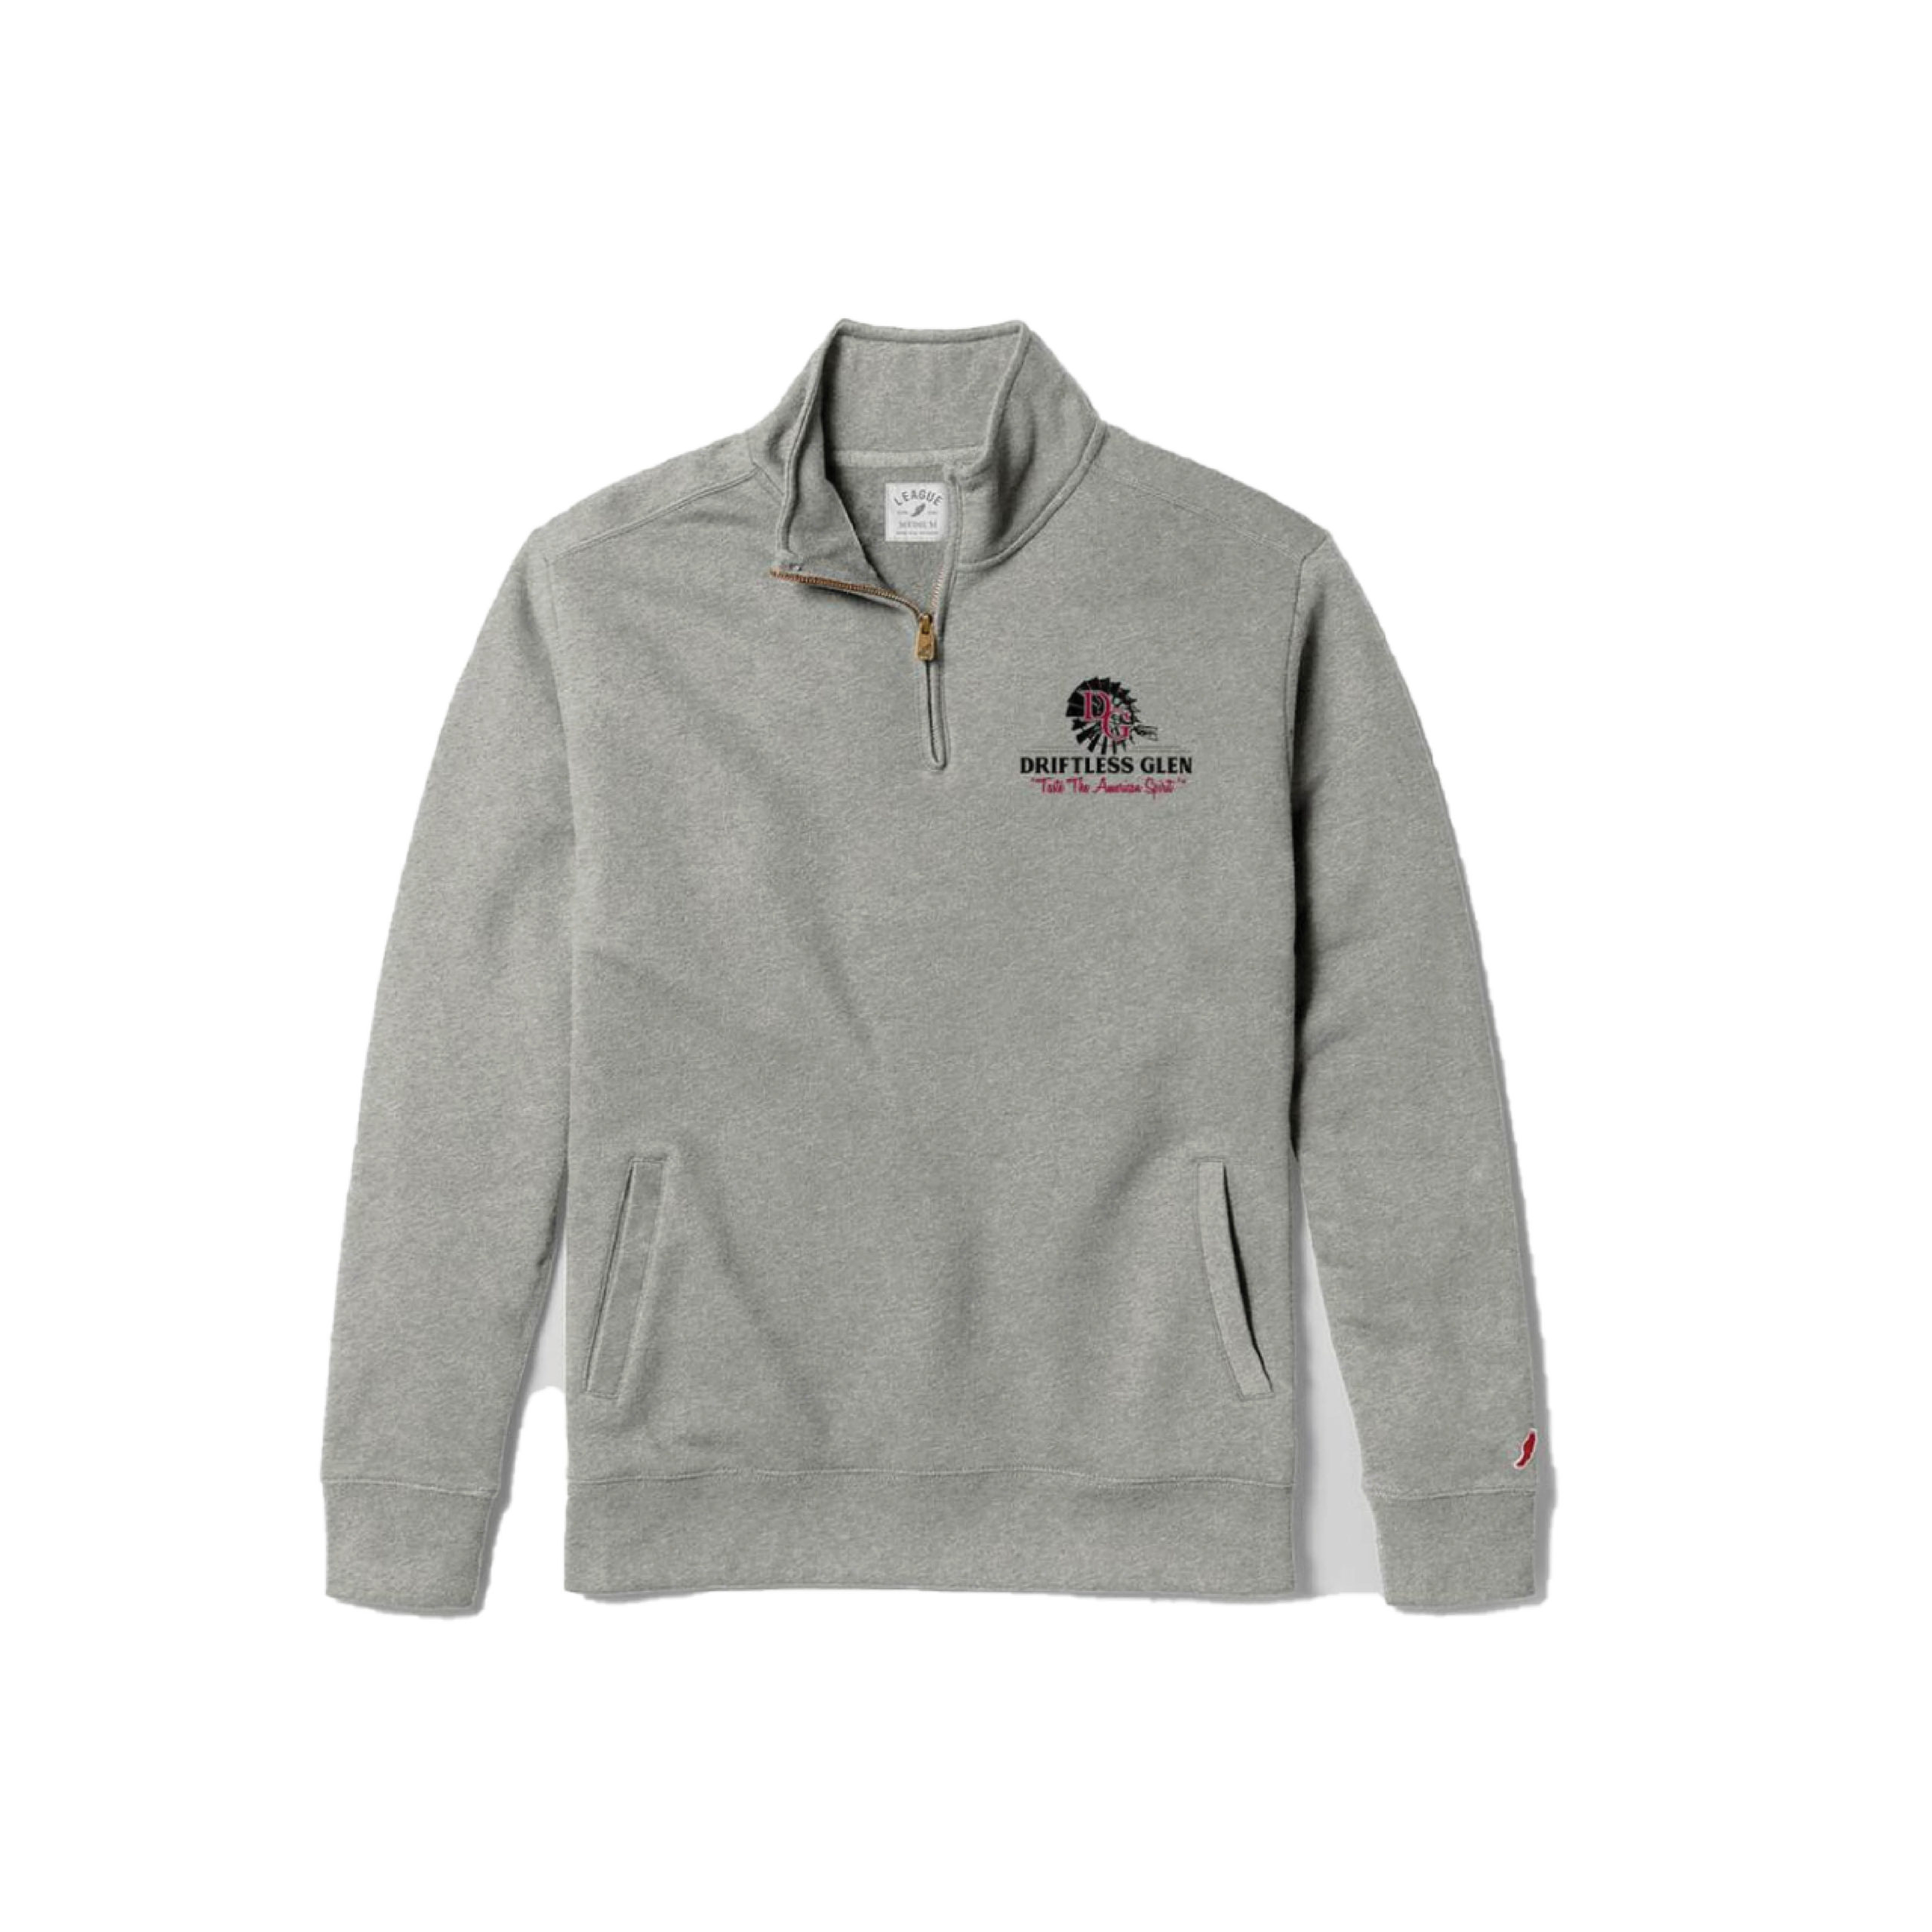 grey quarter zip sweatshirt with the dg logo on the front chest area